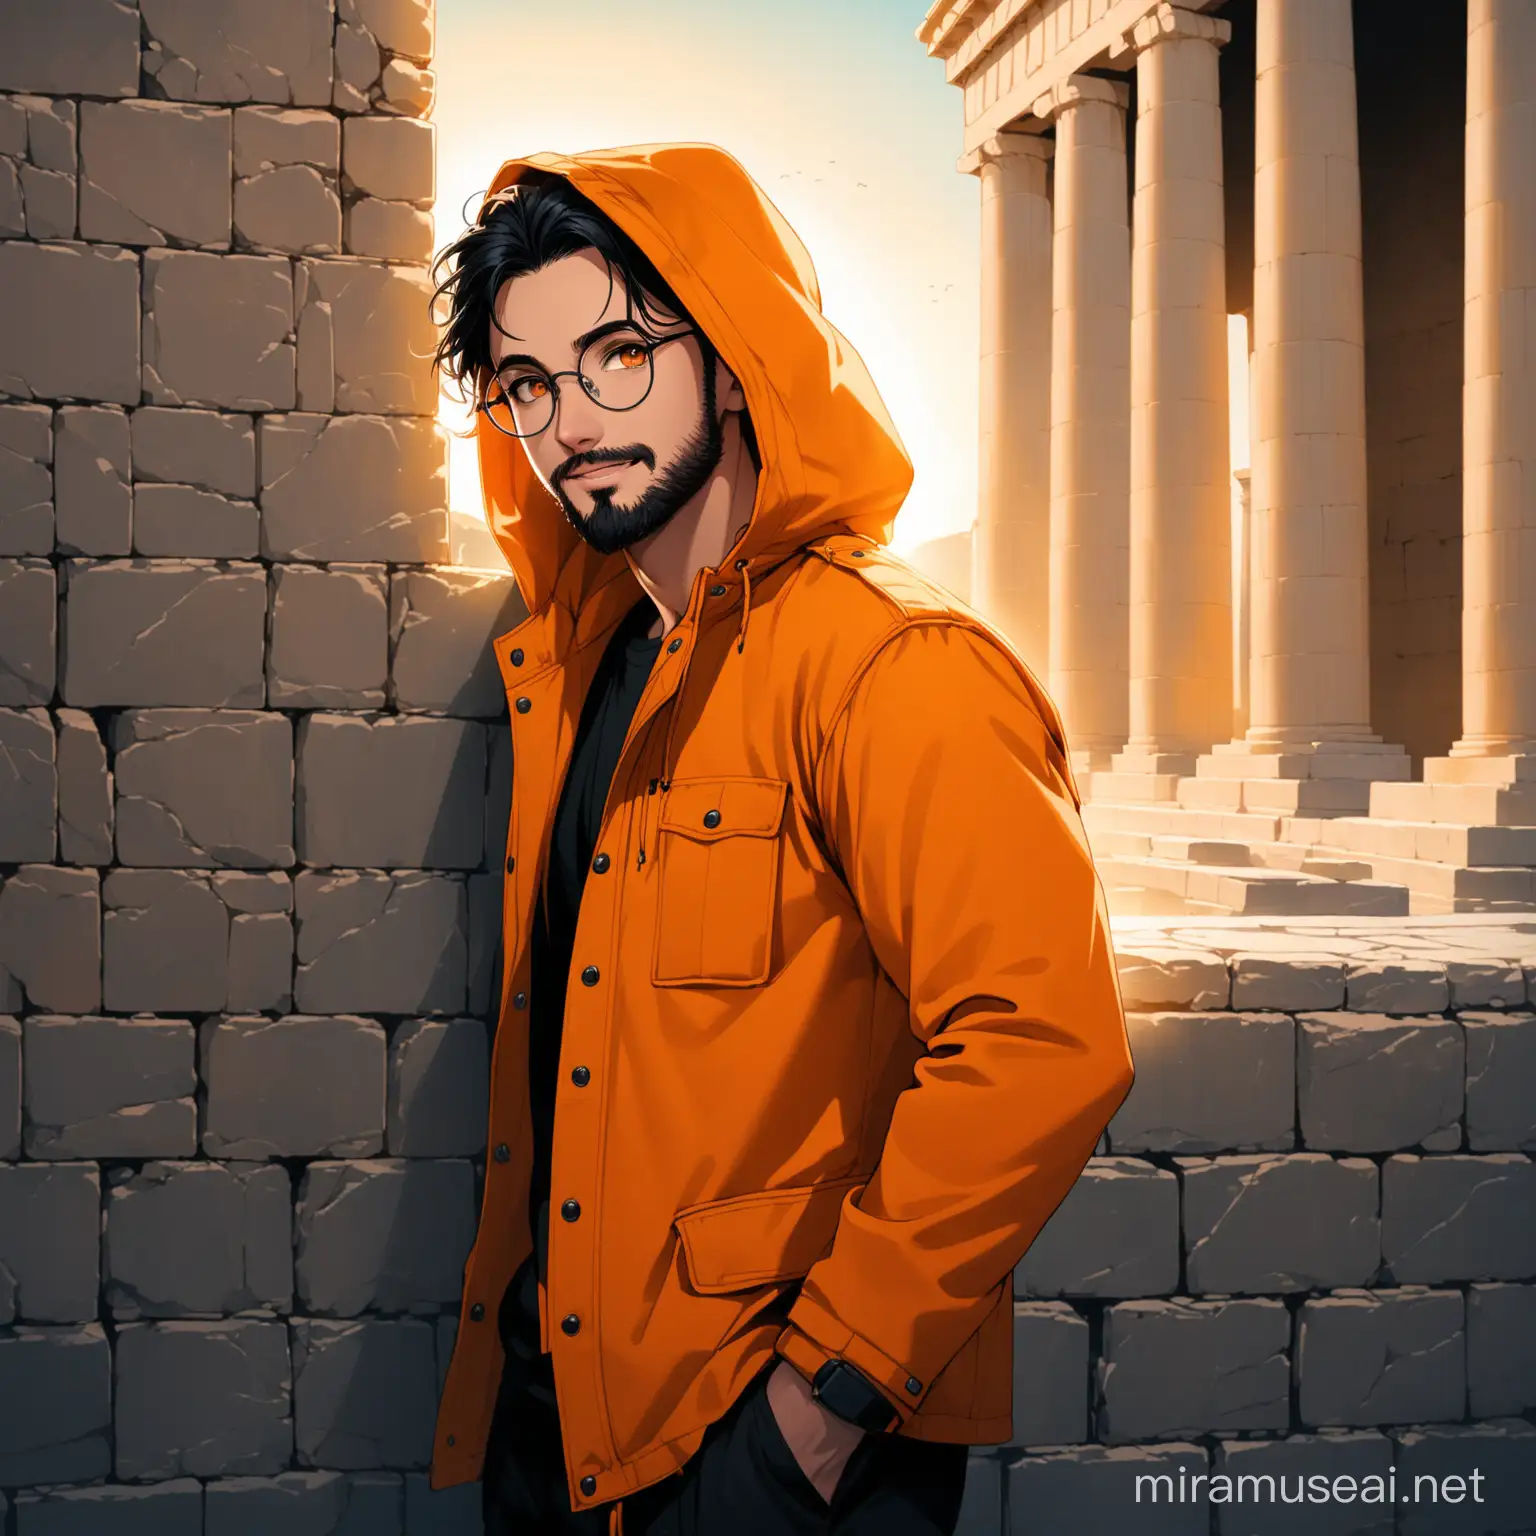 Modern Urban Man with Unique Style Leaning on Wall in Cinematic Lighting